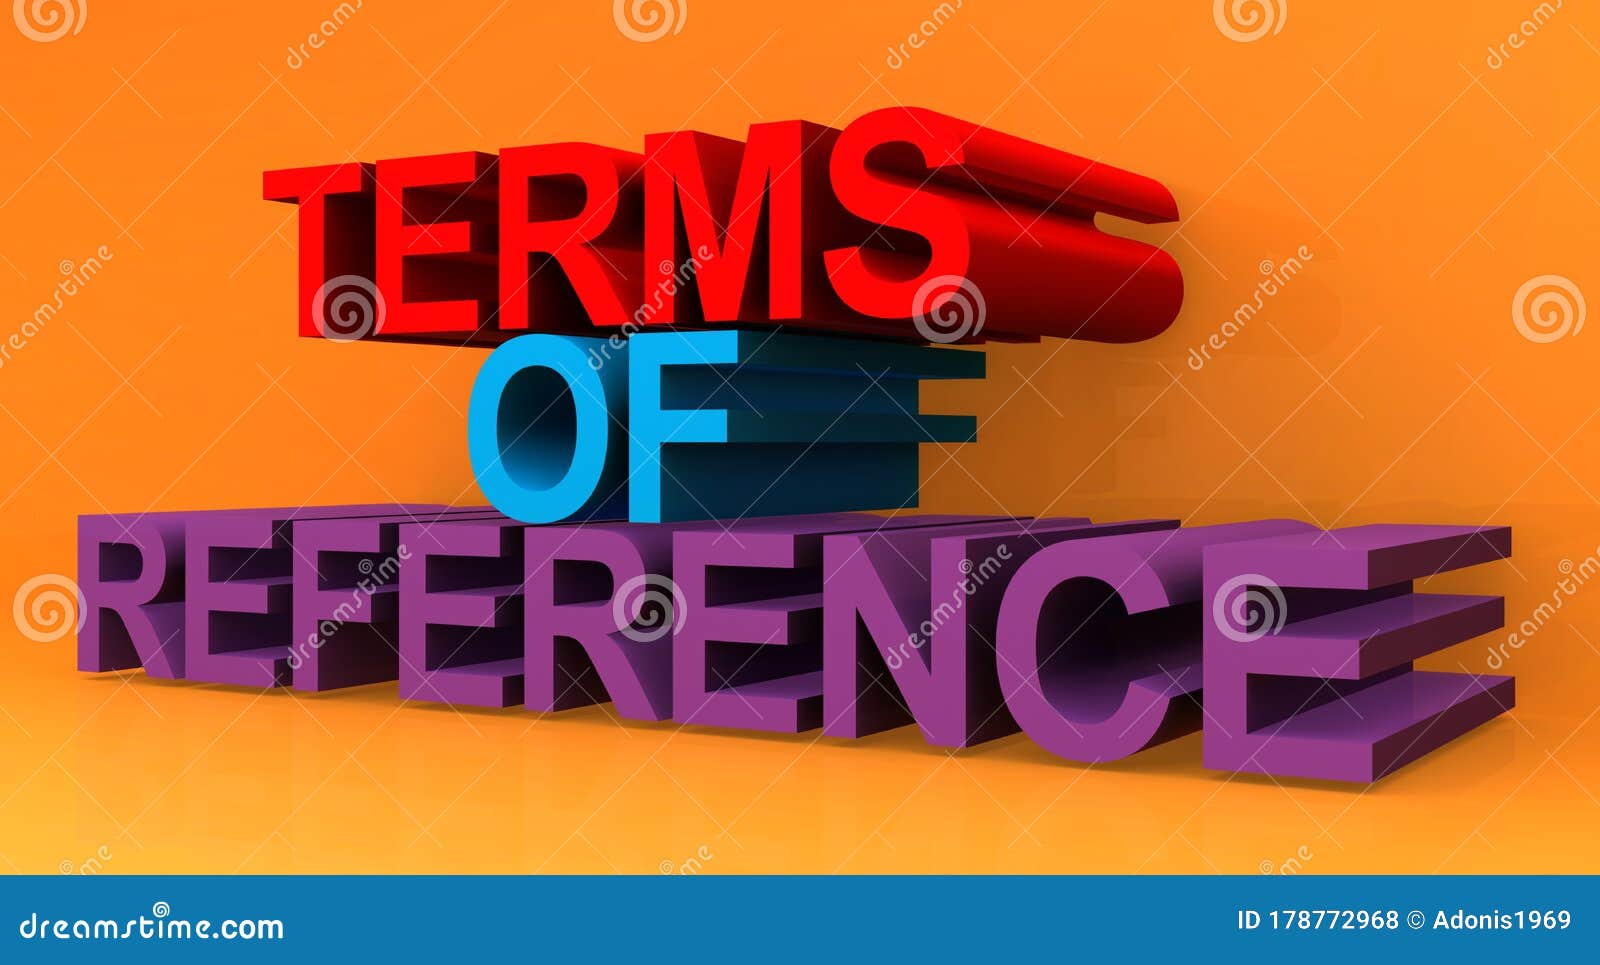 Terms of reference stock illustration. Illustration of model - 178772968